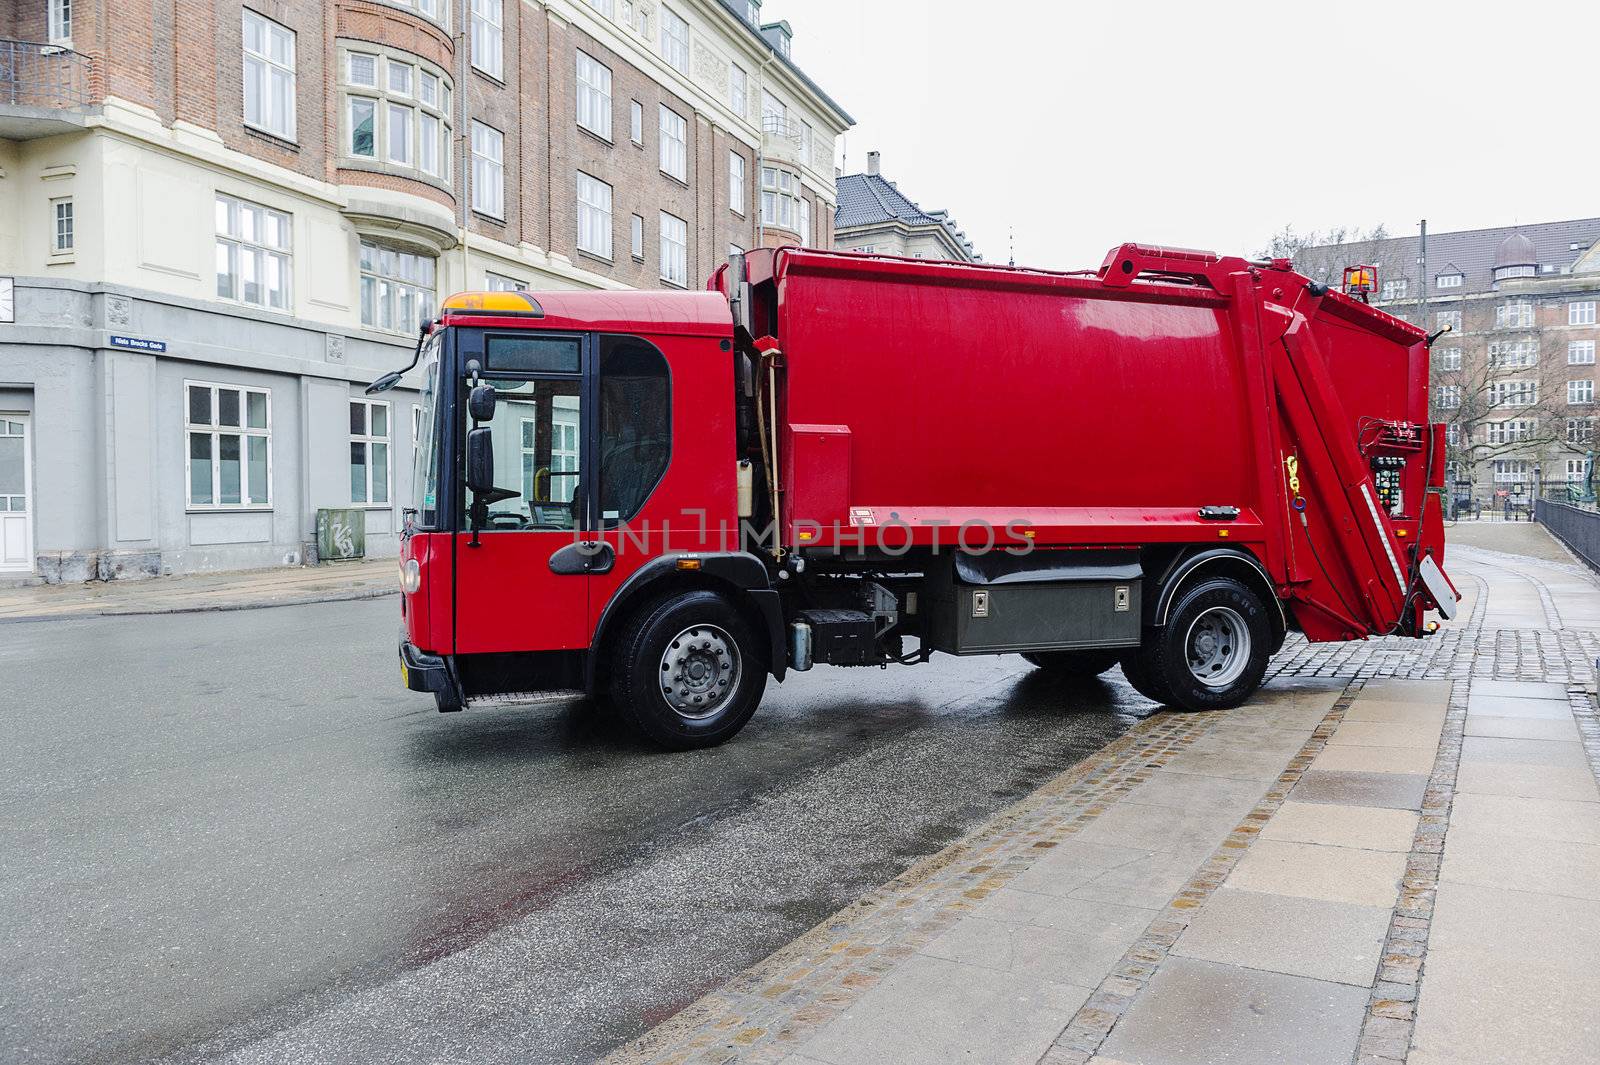 Red garbage disposal truck parked at the side of a street collecting household rubbish and waste for crushing, recycling and treatment or disposal on municipal dumps